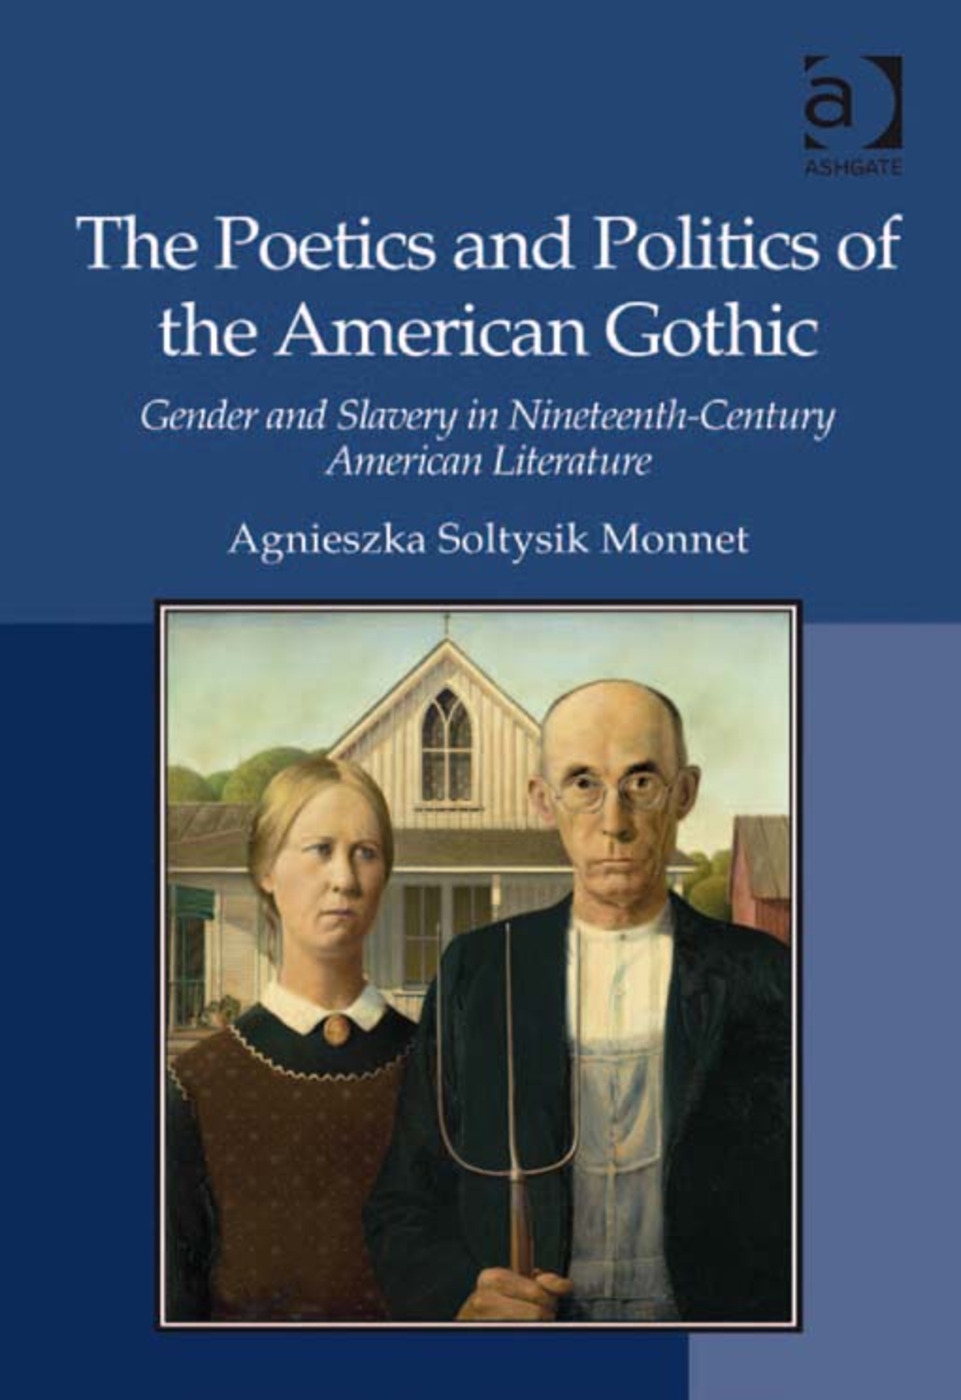 The Poetics and Politics of the American Gothic: Gender and Slavery in Nineteenth-Century American Literature. Agnieszka Soltysik Monnet